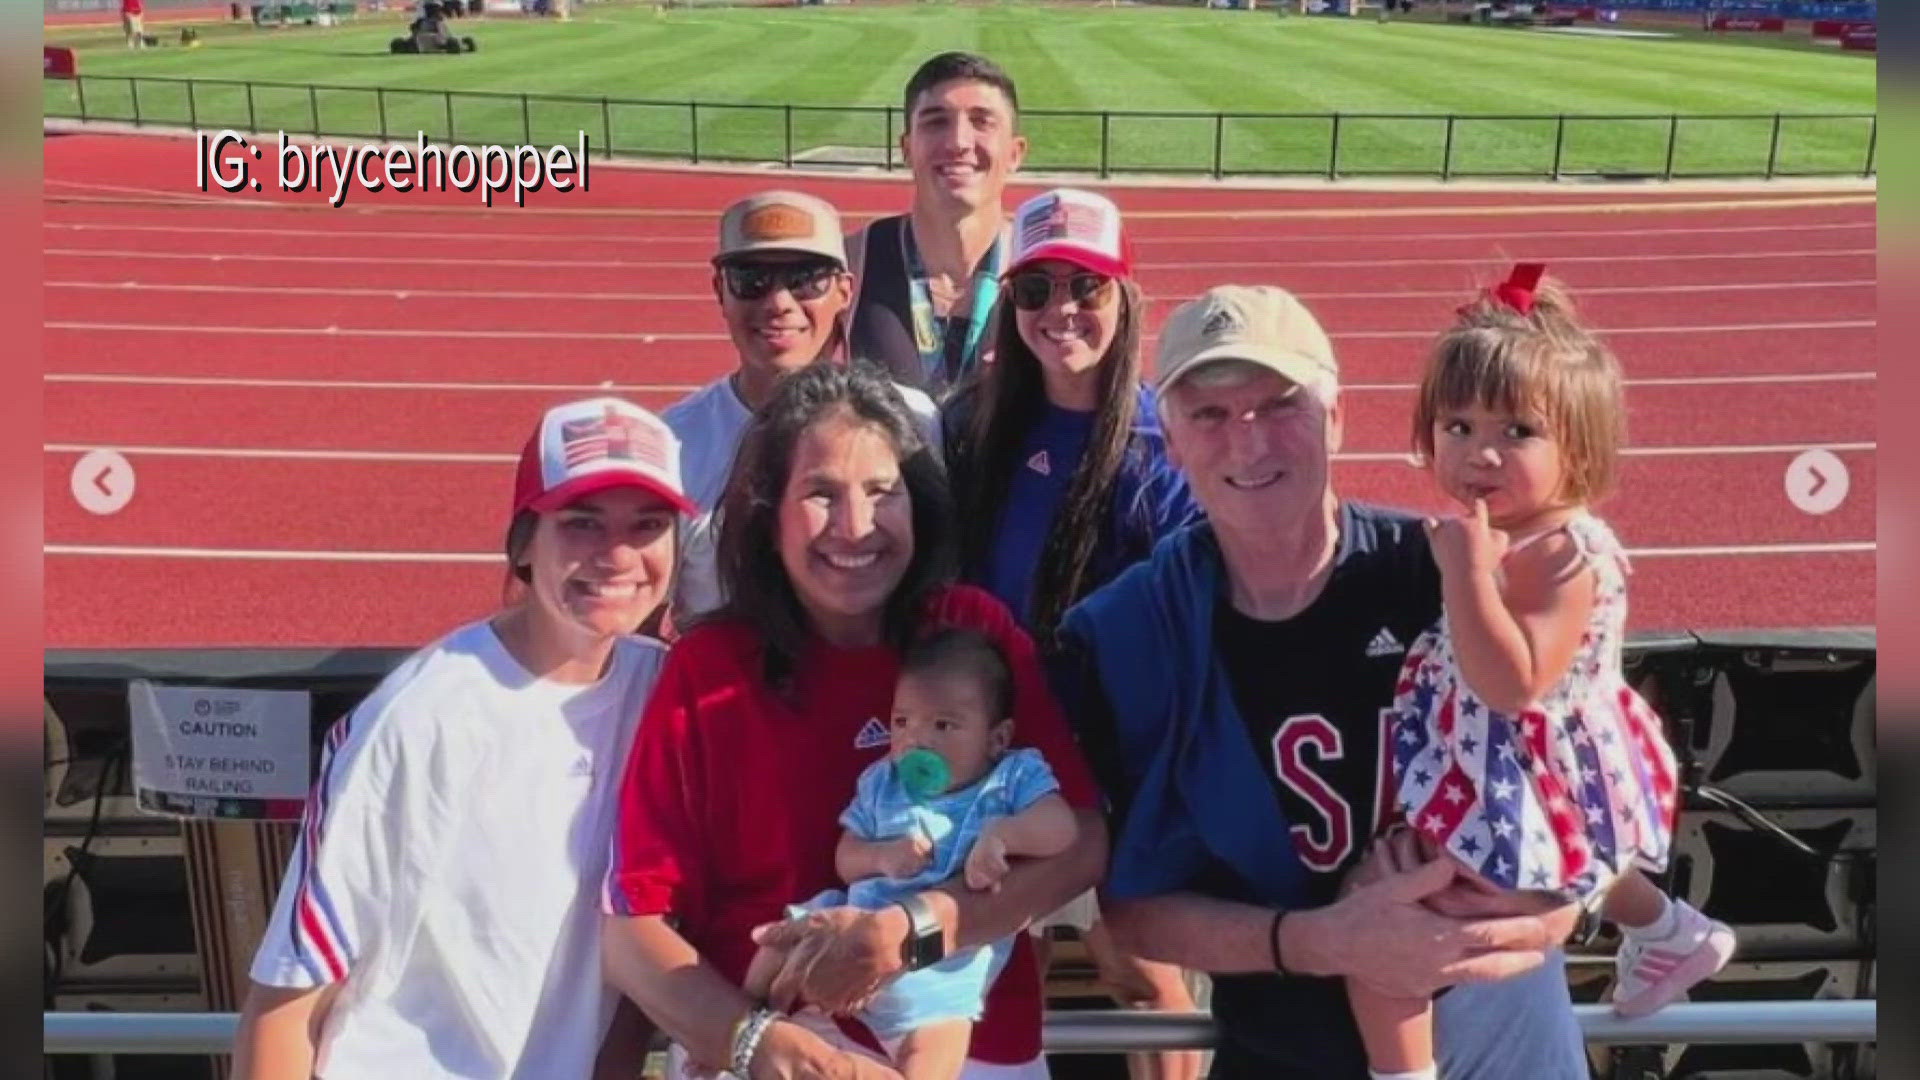 Two-time U.S. Olympian Bryce Hoppel made history at trials. Hoppel and his parents spoke on that, Paris and his journey as he gets set to return to the world stage.